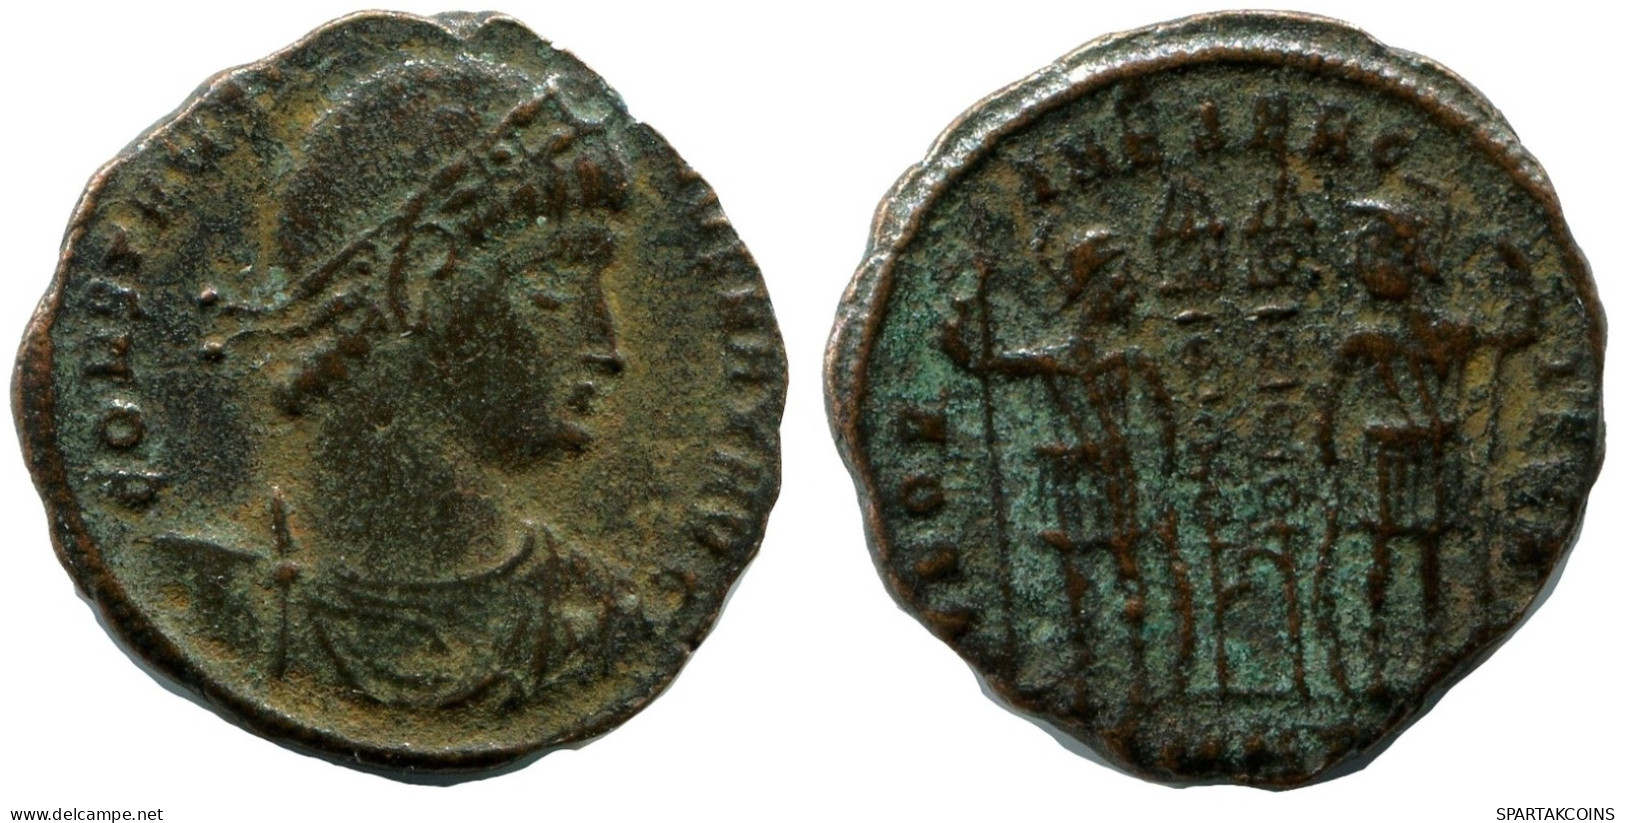 CONSTANTINE I MINTED IN NICOMEDIA FOUND IN IHNASYAH HOARD EGYPT #ANC10947.14.F.A - El Impero Christiano (307 / 363)